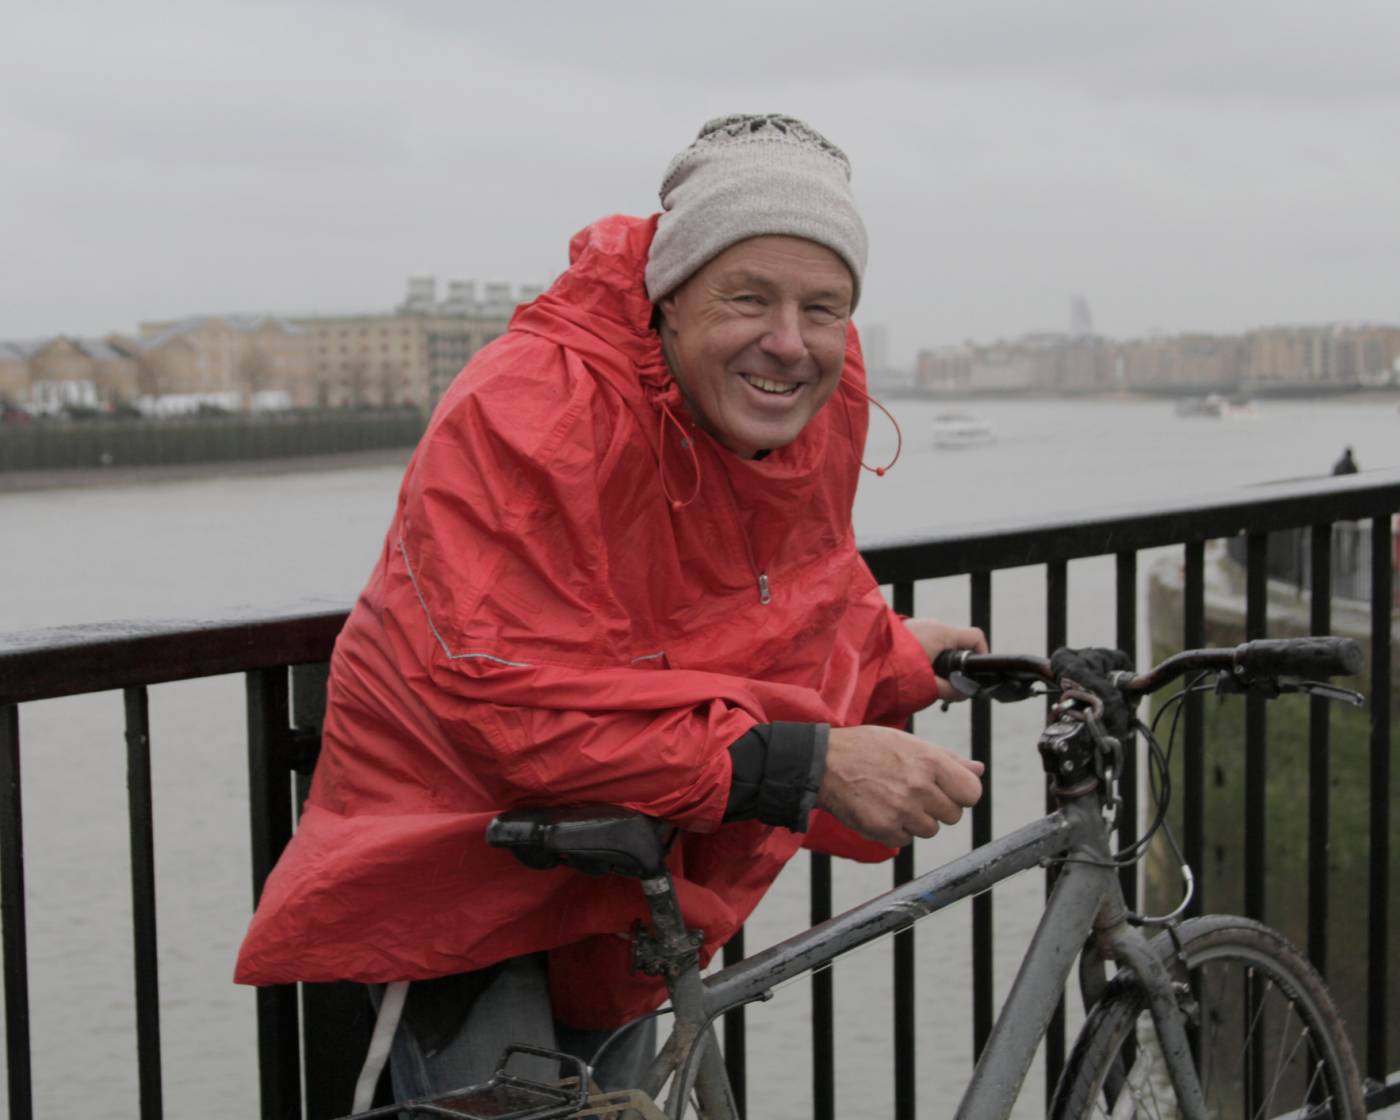 Man wearing a raincoat standing in the rain by his bike